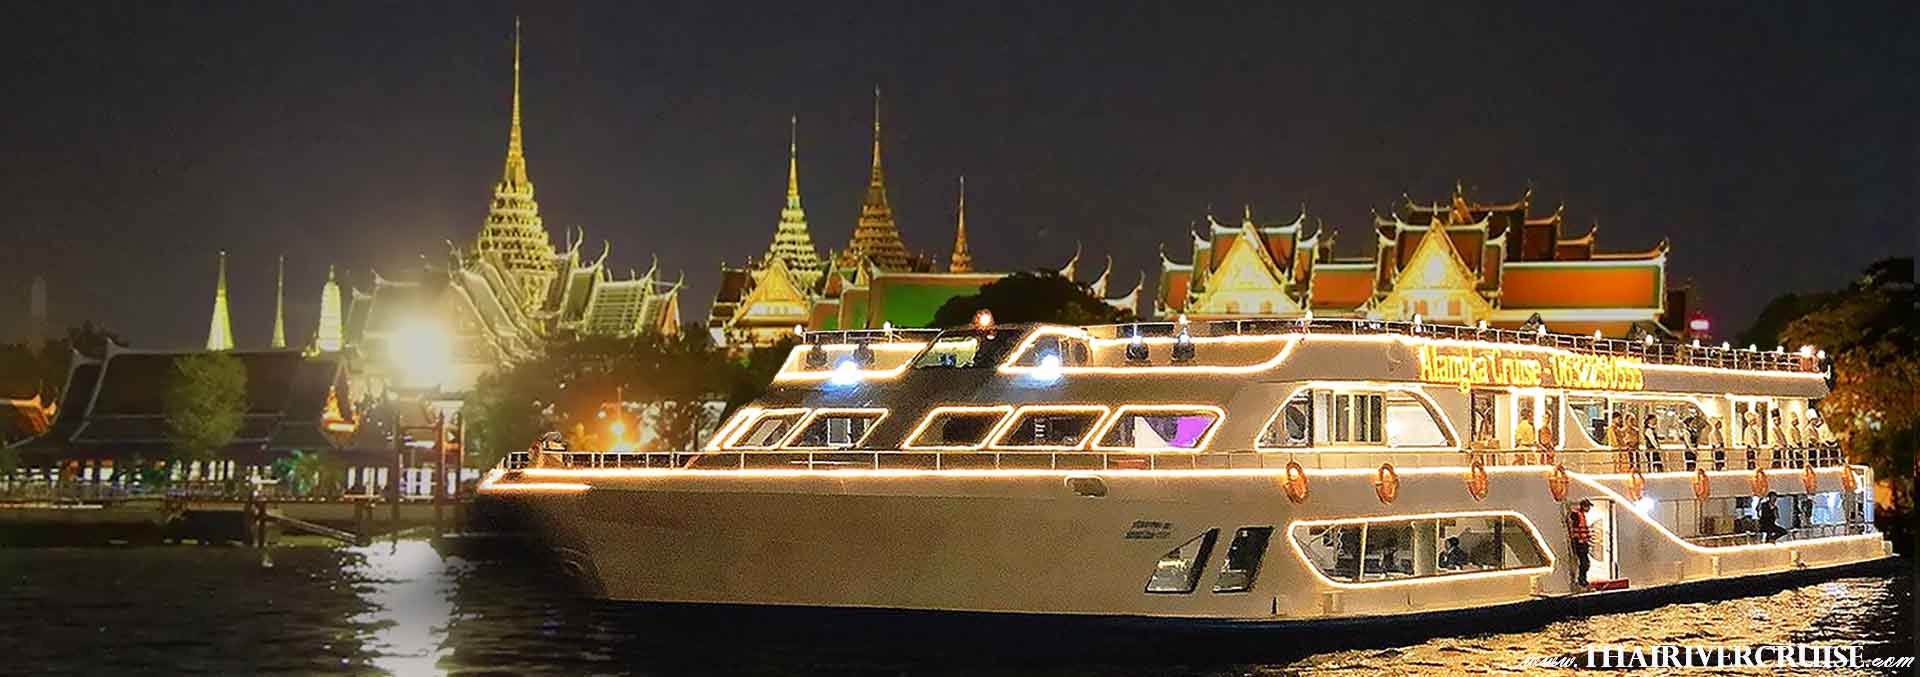 Alangka Cruise Bangkok Dinner Cruise Promotion Discount Cheap Ticket Price Offers Booking Online 